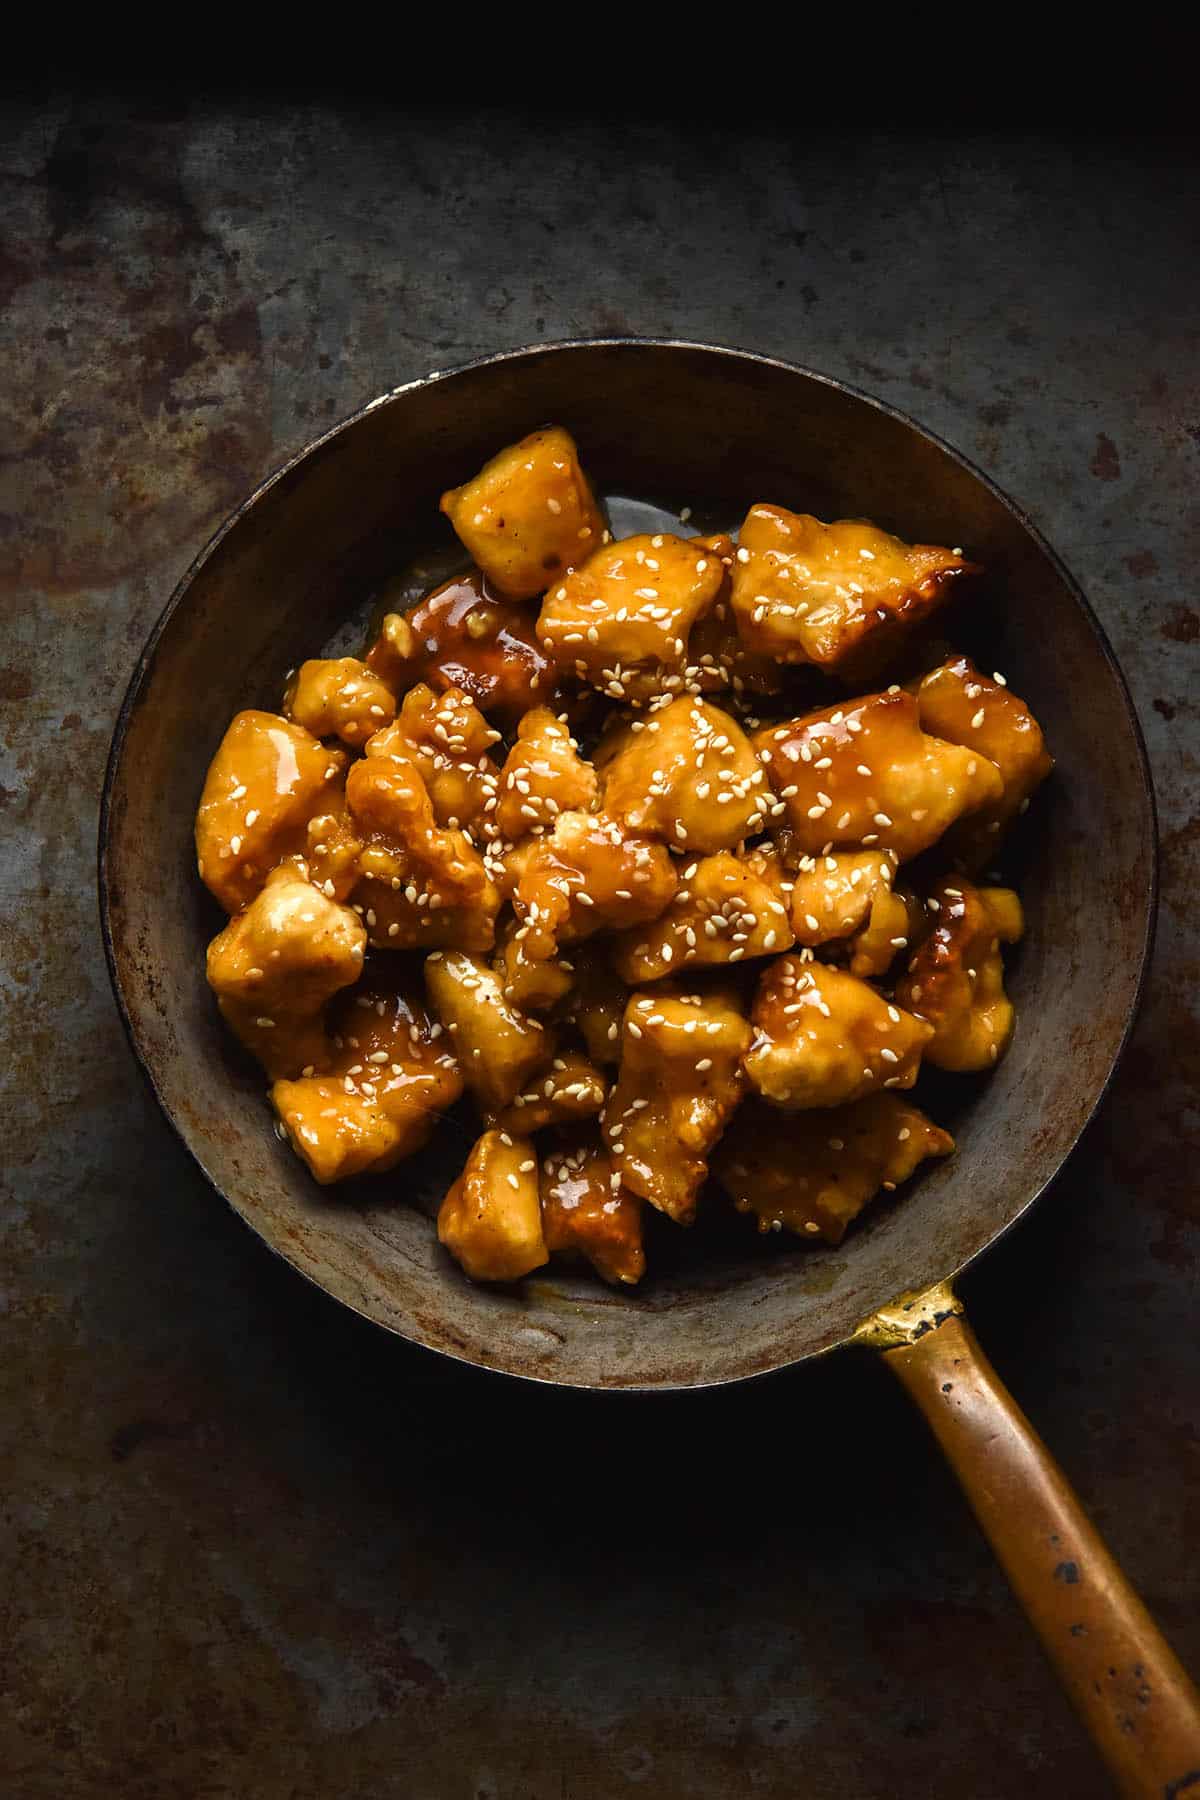 An aerial image of a dark steel mini skillet filled with juicy lemon tofu topped with toasted sesame seeds. The skillet sits on a dark steel backdrop.